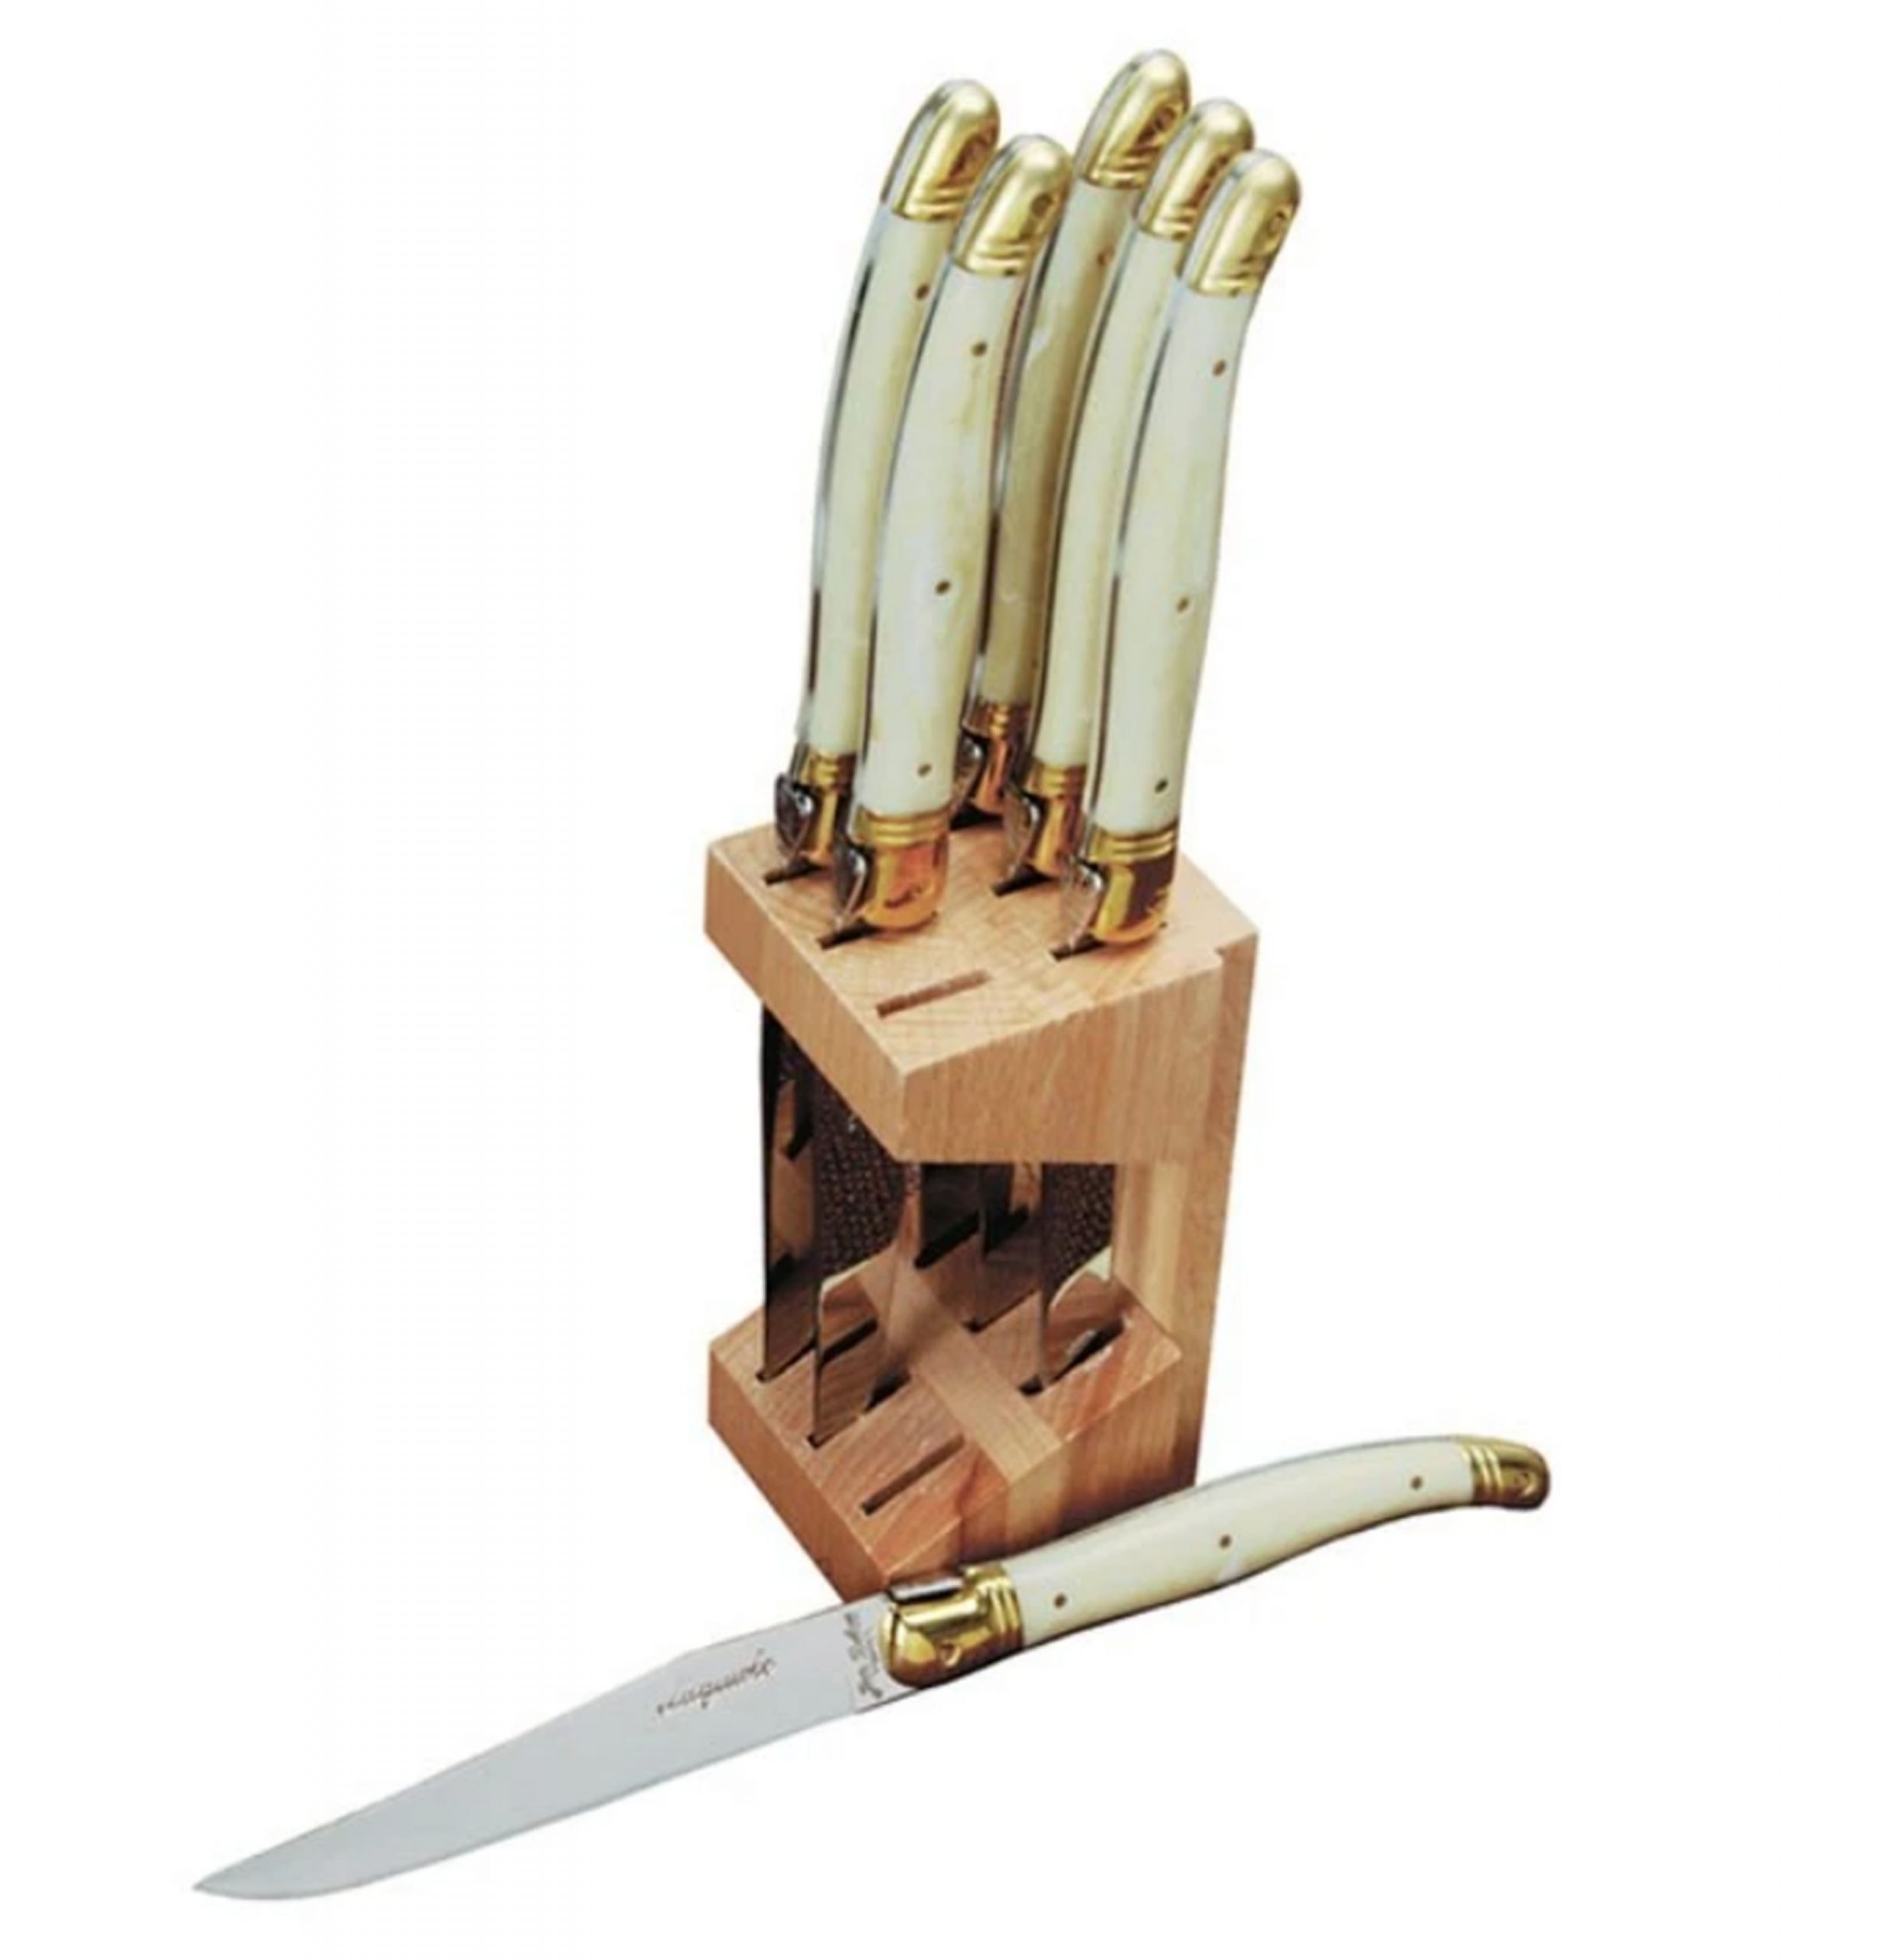 https://www.astoriahomestore.com/wp-content/uploads/2020/03/Shopping-for-Laguiole-6-Piece-Steak-Knife-Wood-Block-Set-in-Ivory-and-Gold-scaled.jpg